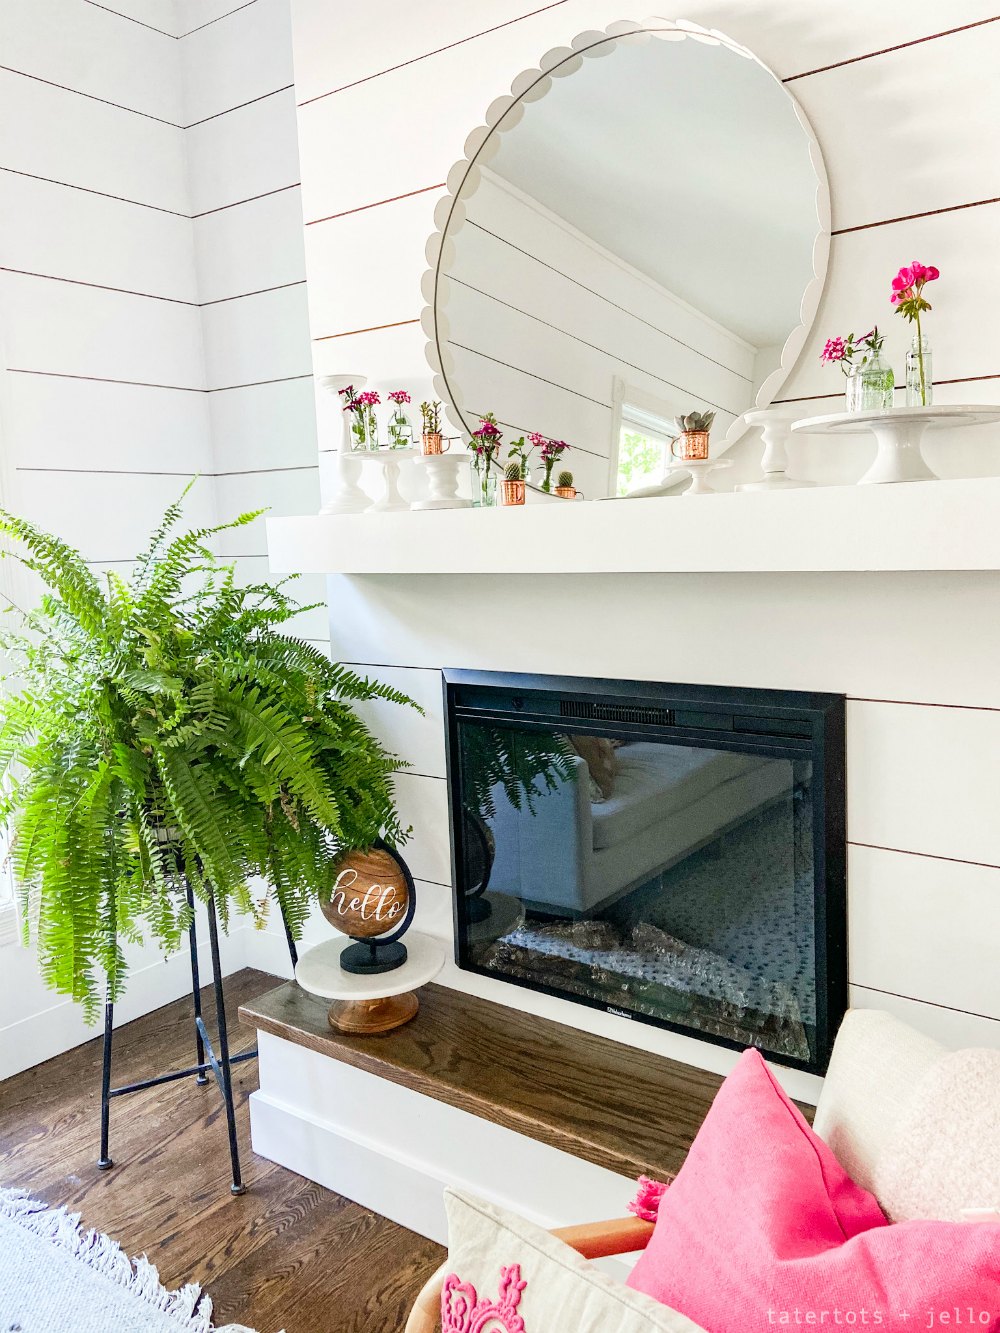 How to create a Bright and Simple Summer Mantel. Use what you have to create a fresh summer makeover for your mantel or shelf. 